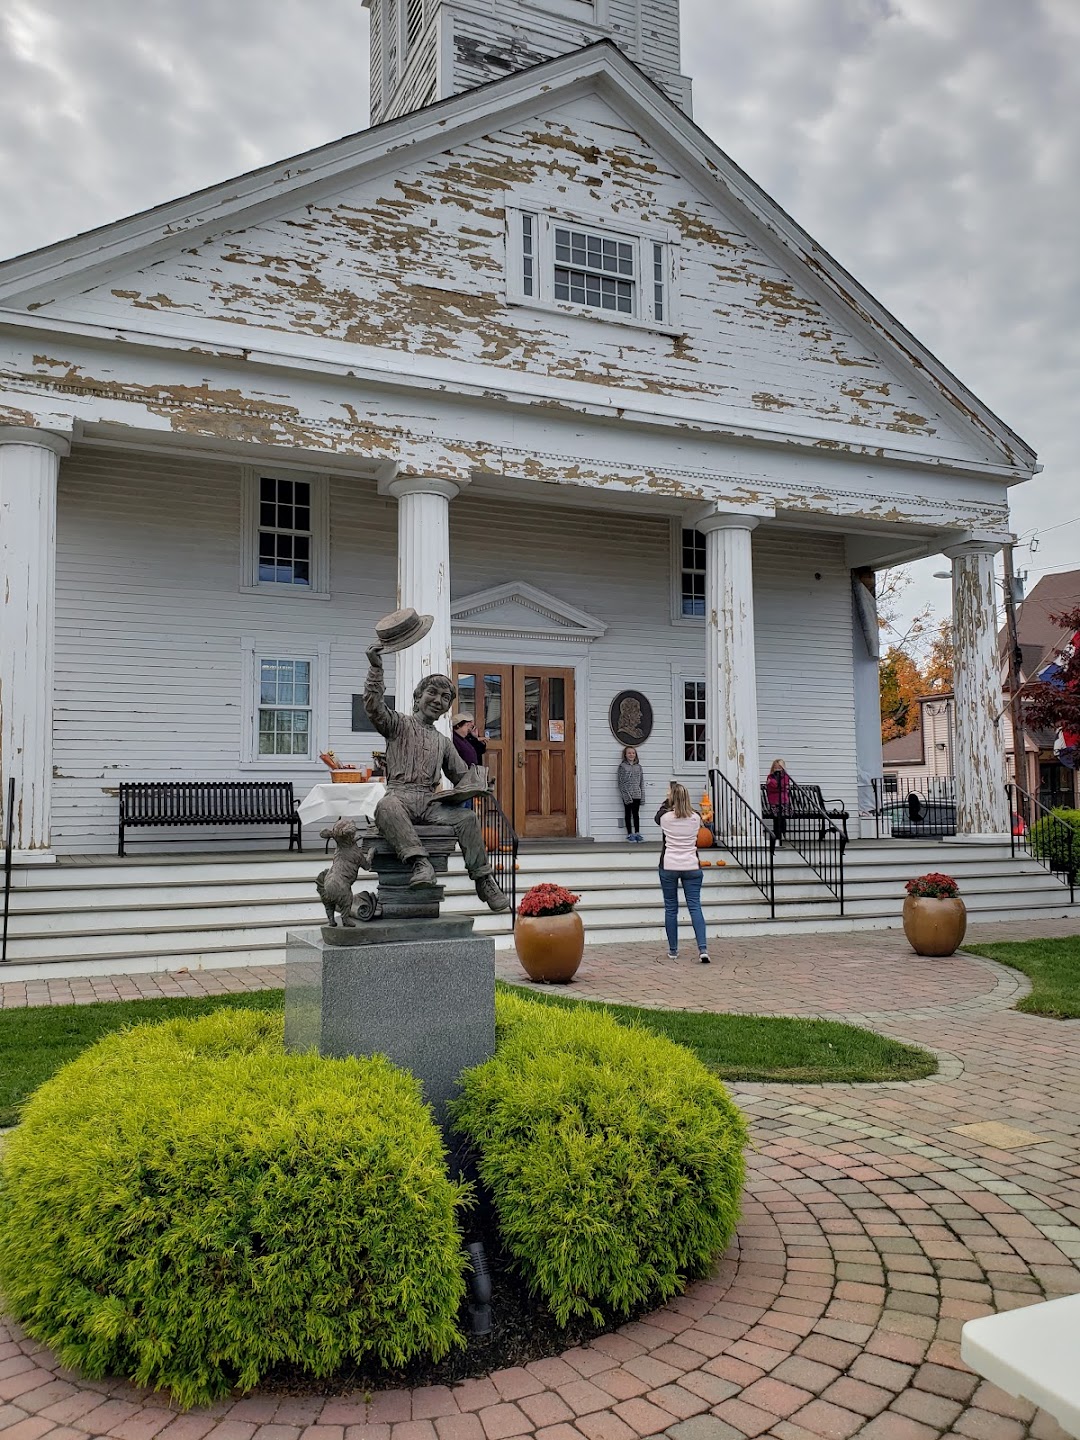 Franklin Historical Museum